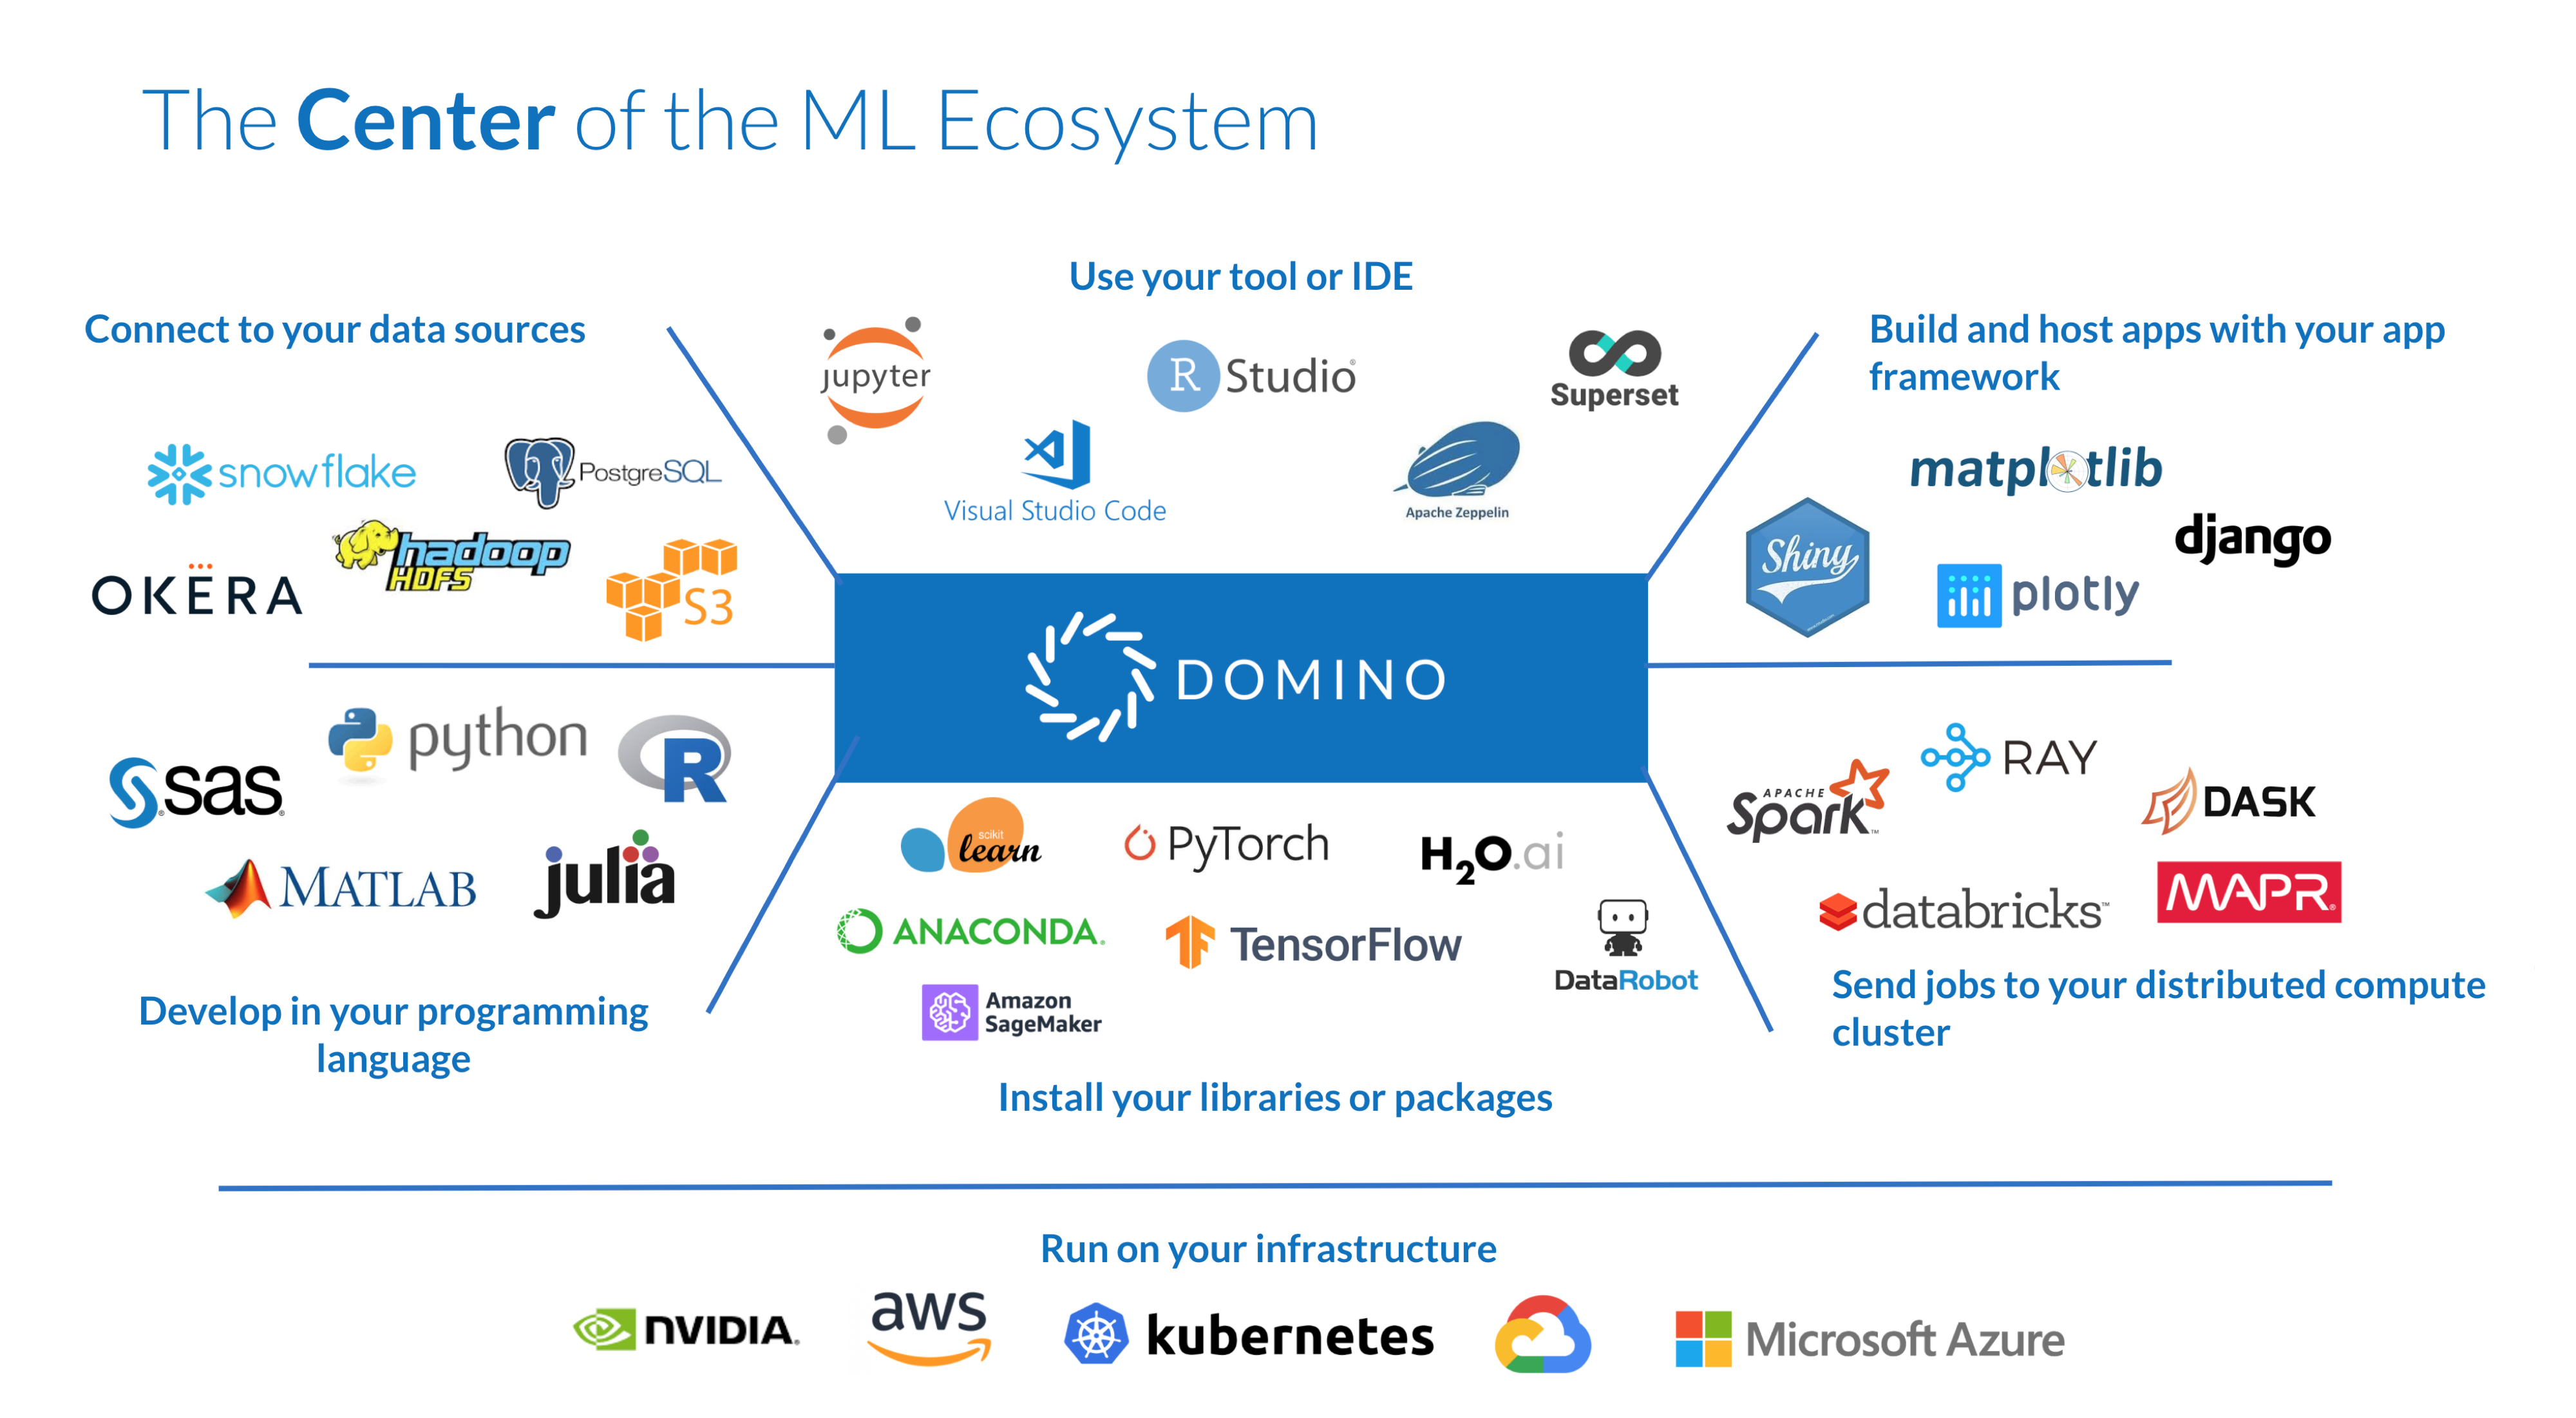 Domino is at the center of the machine learning ecosystem.